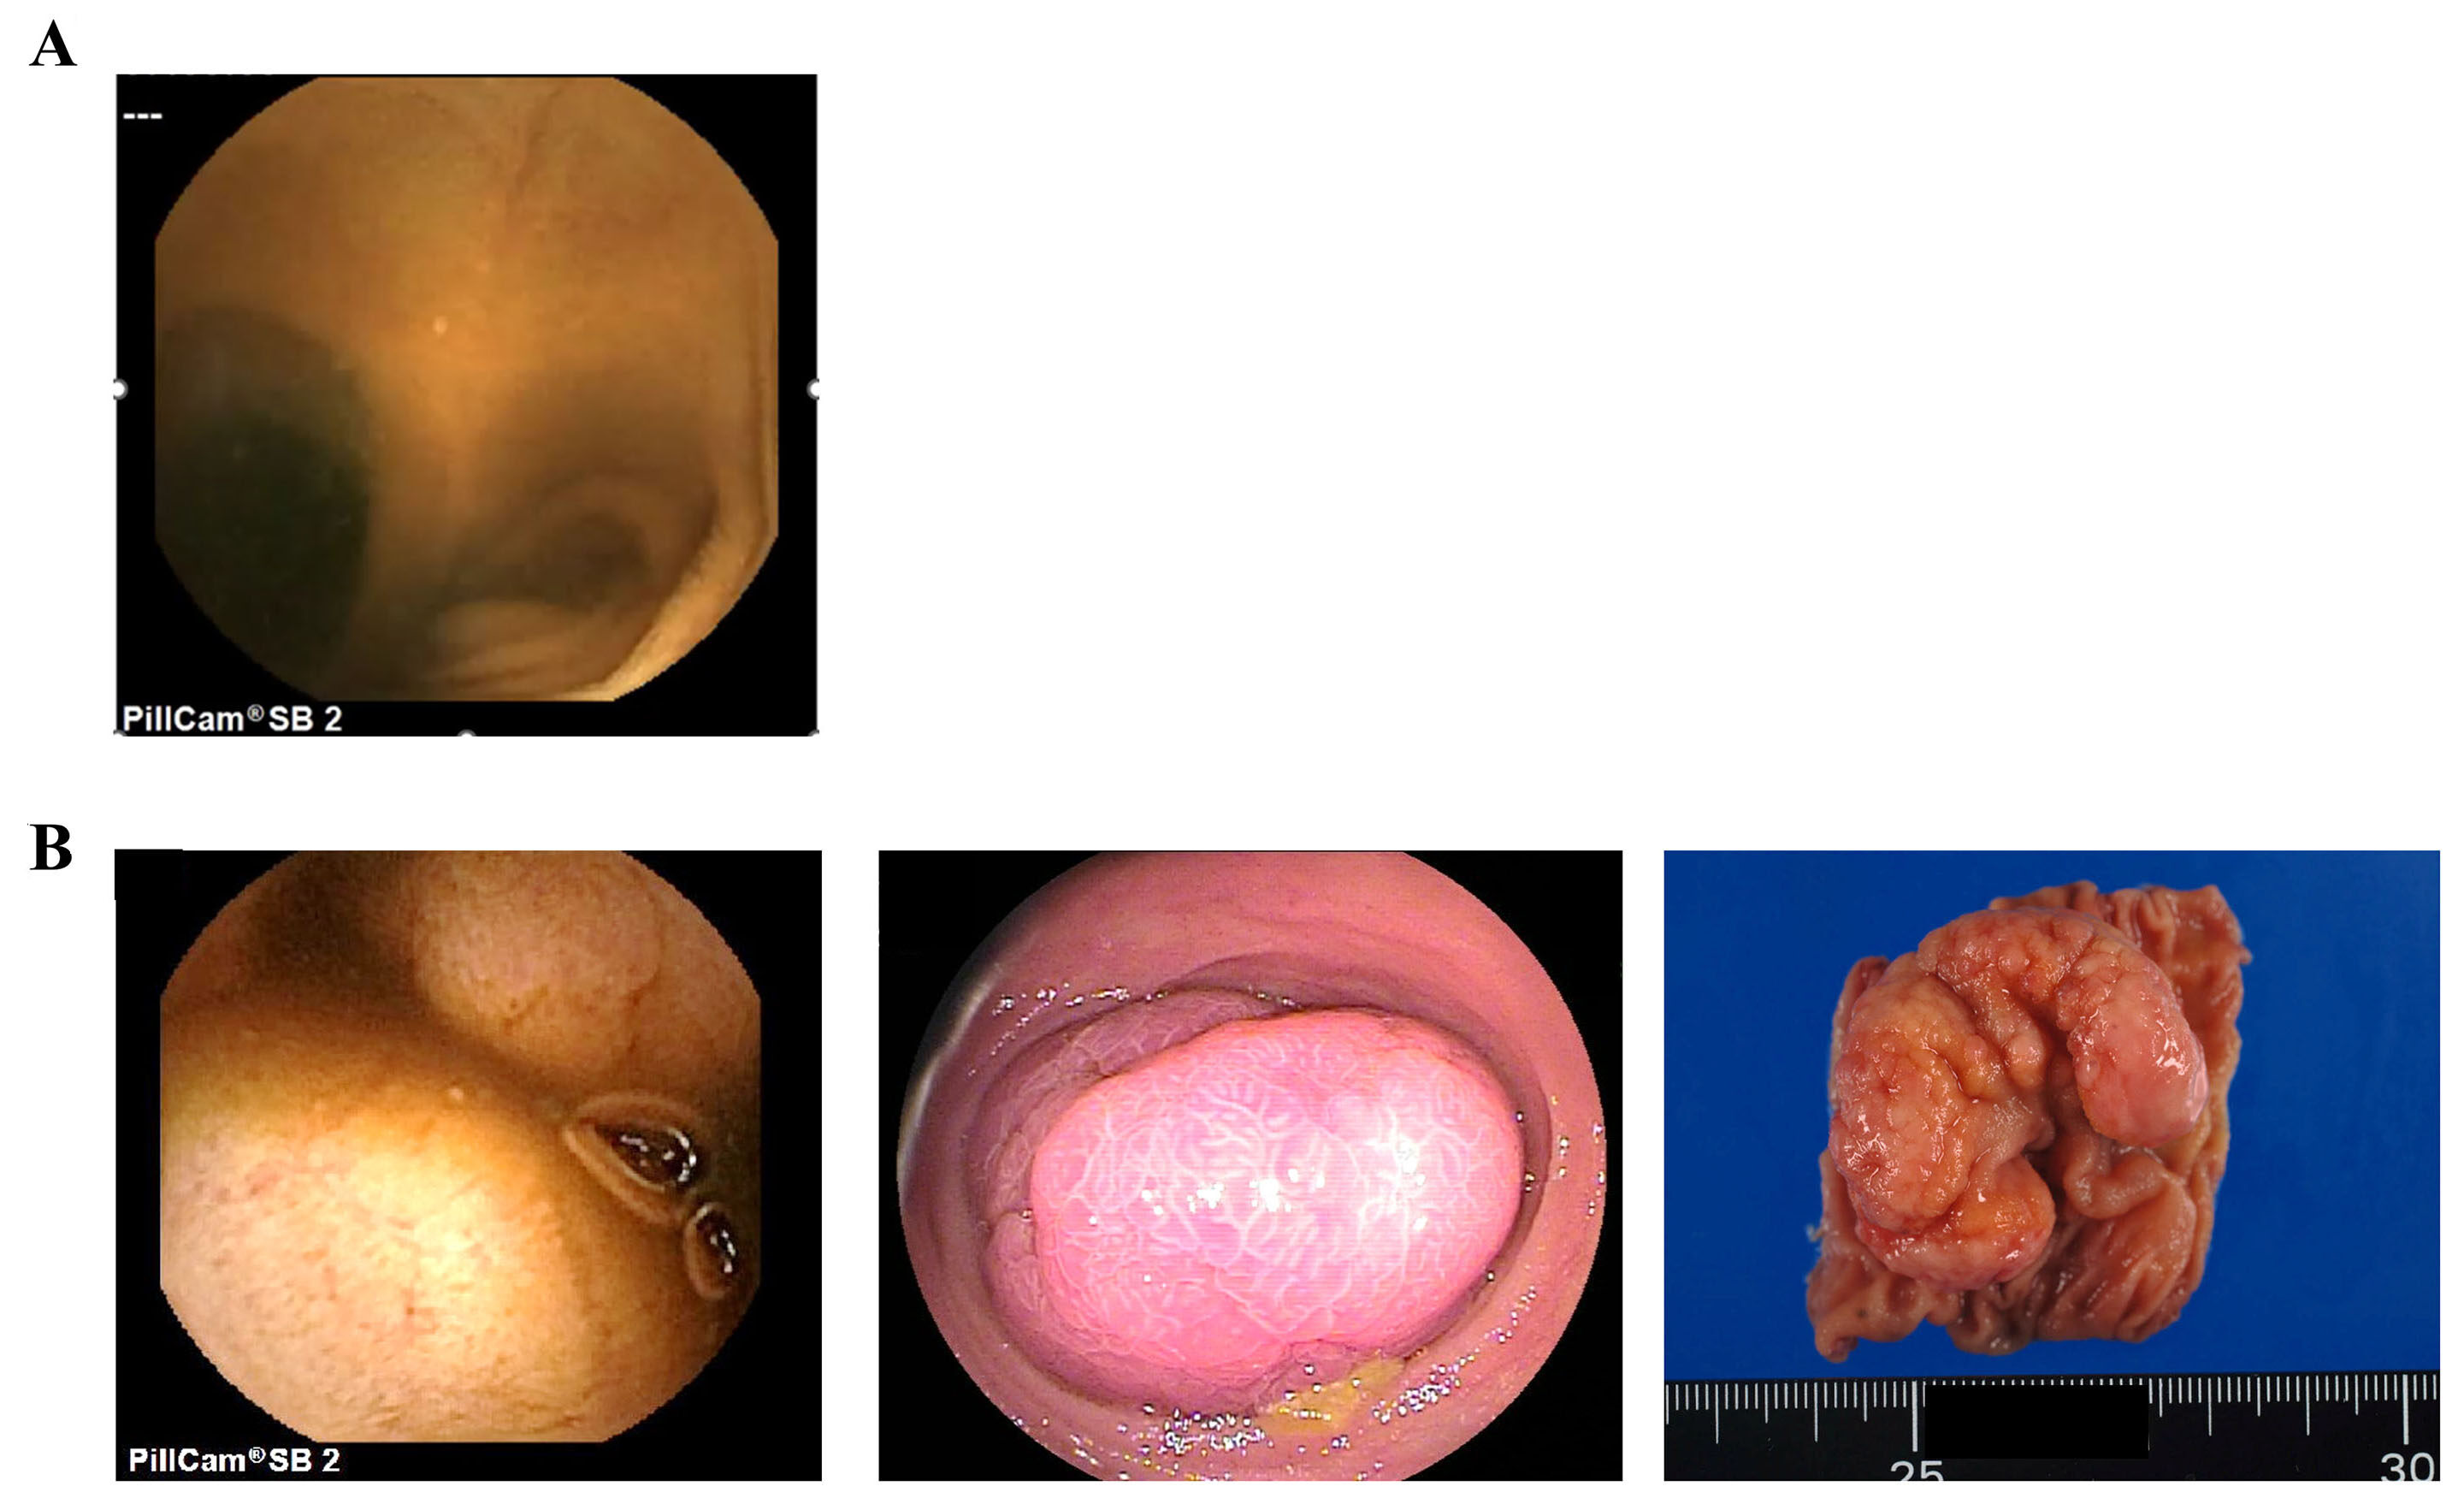 Usefulness of capsule endoscopy for small intestinal obstruction: a dual-center prospective observational study